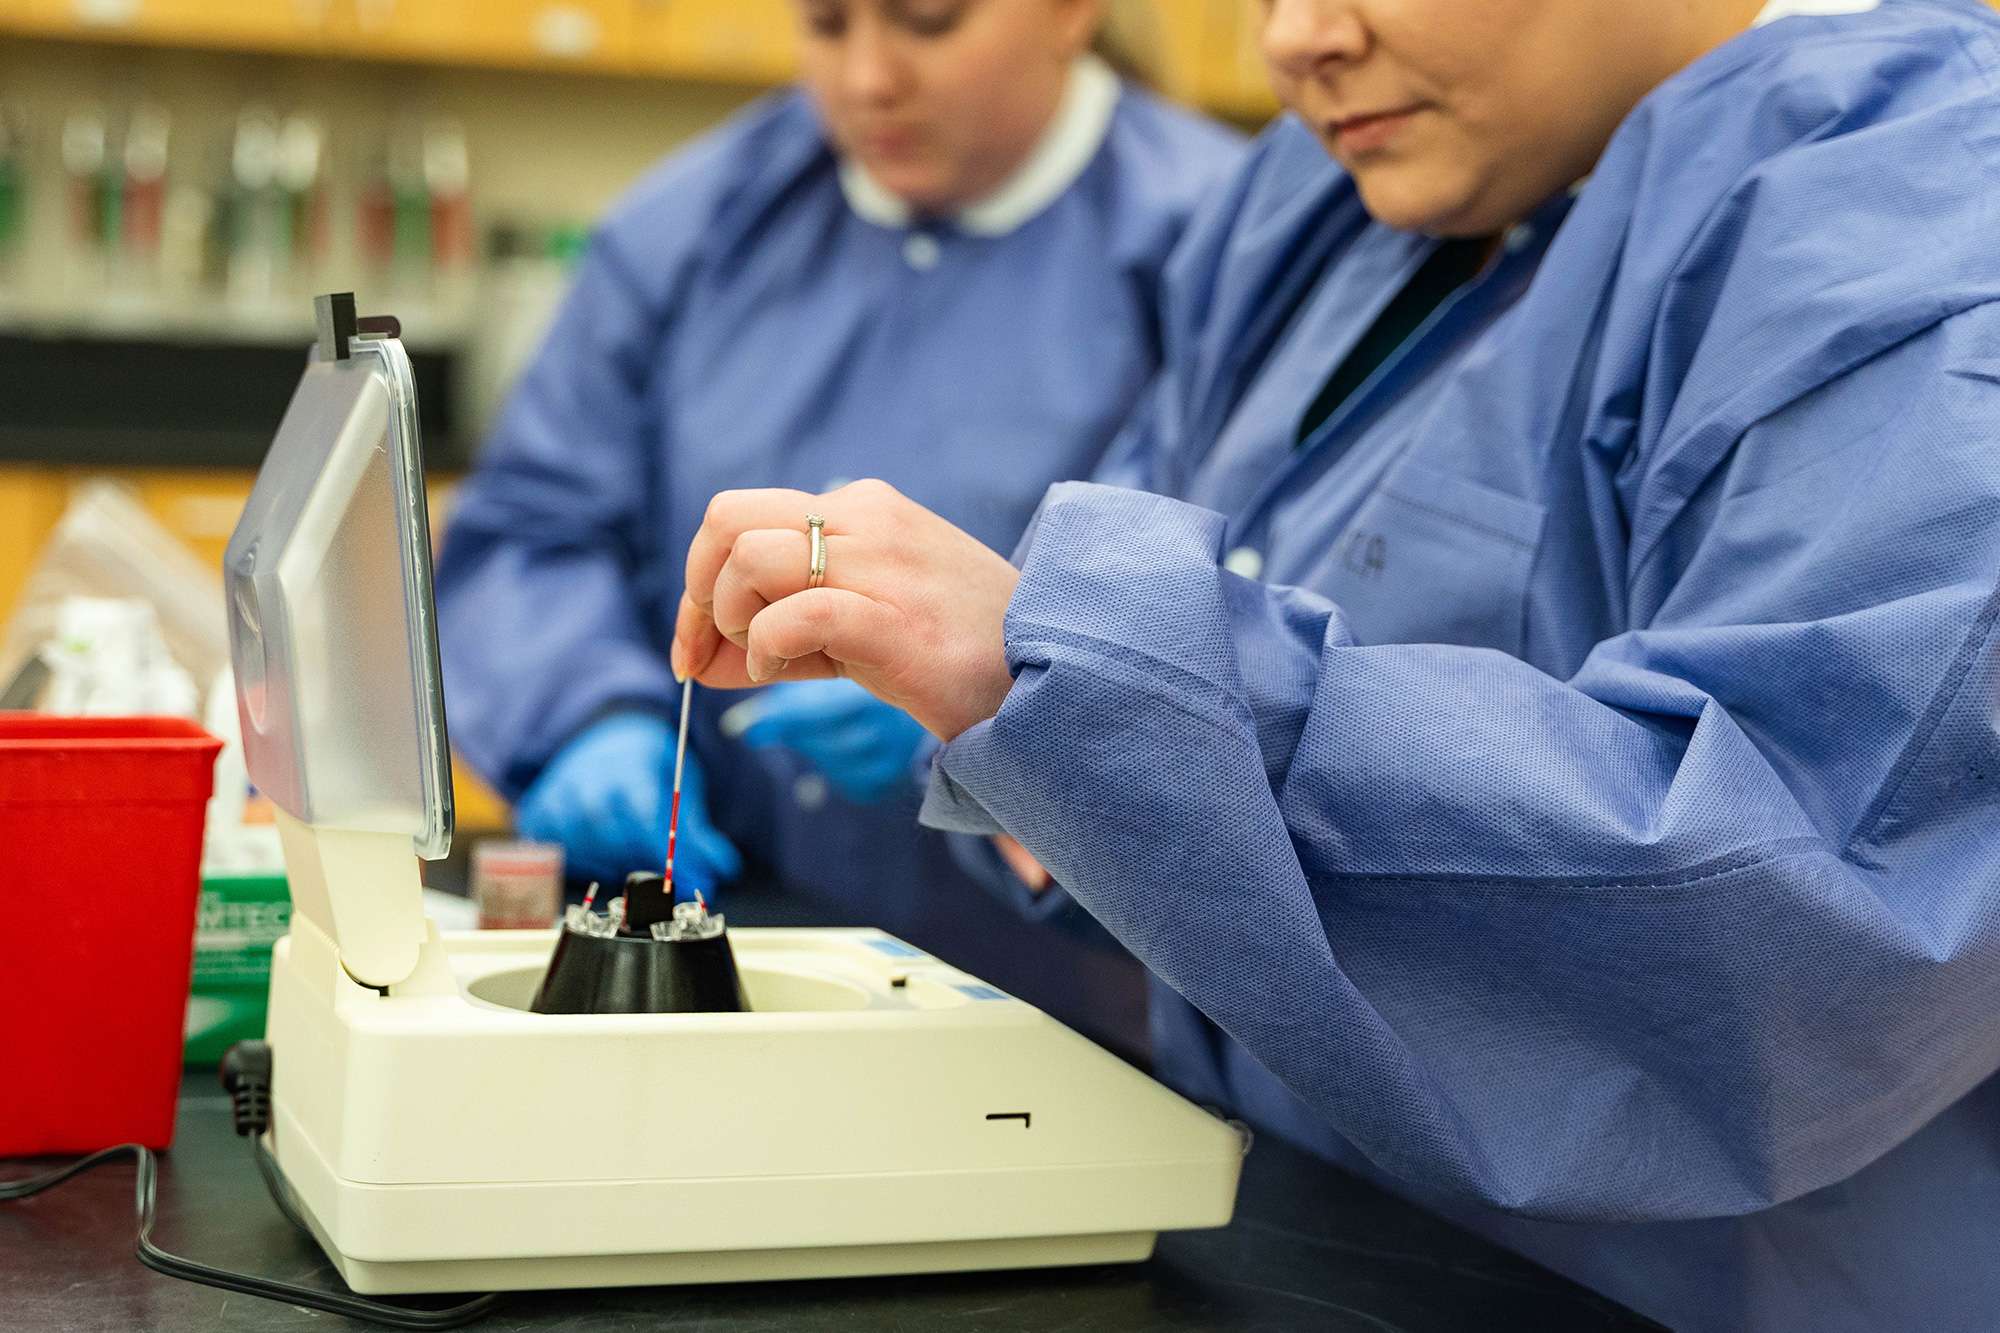 Two Medical Assistants work together to check a patient's blood work in a lab.